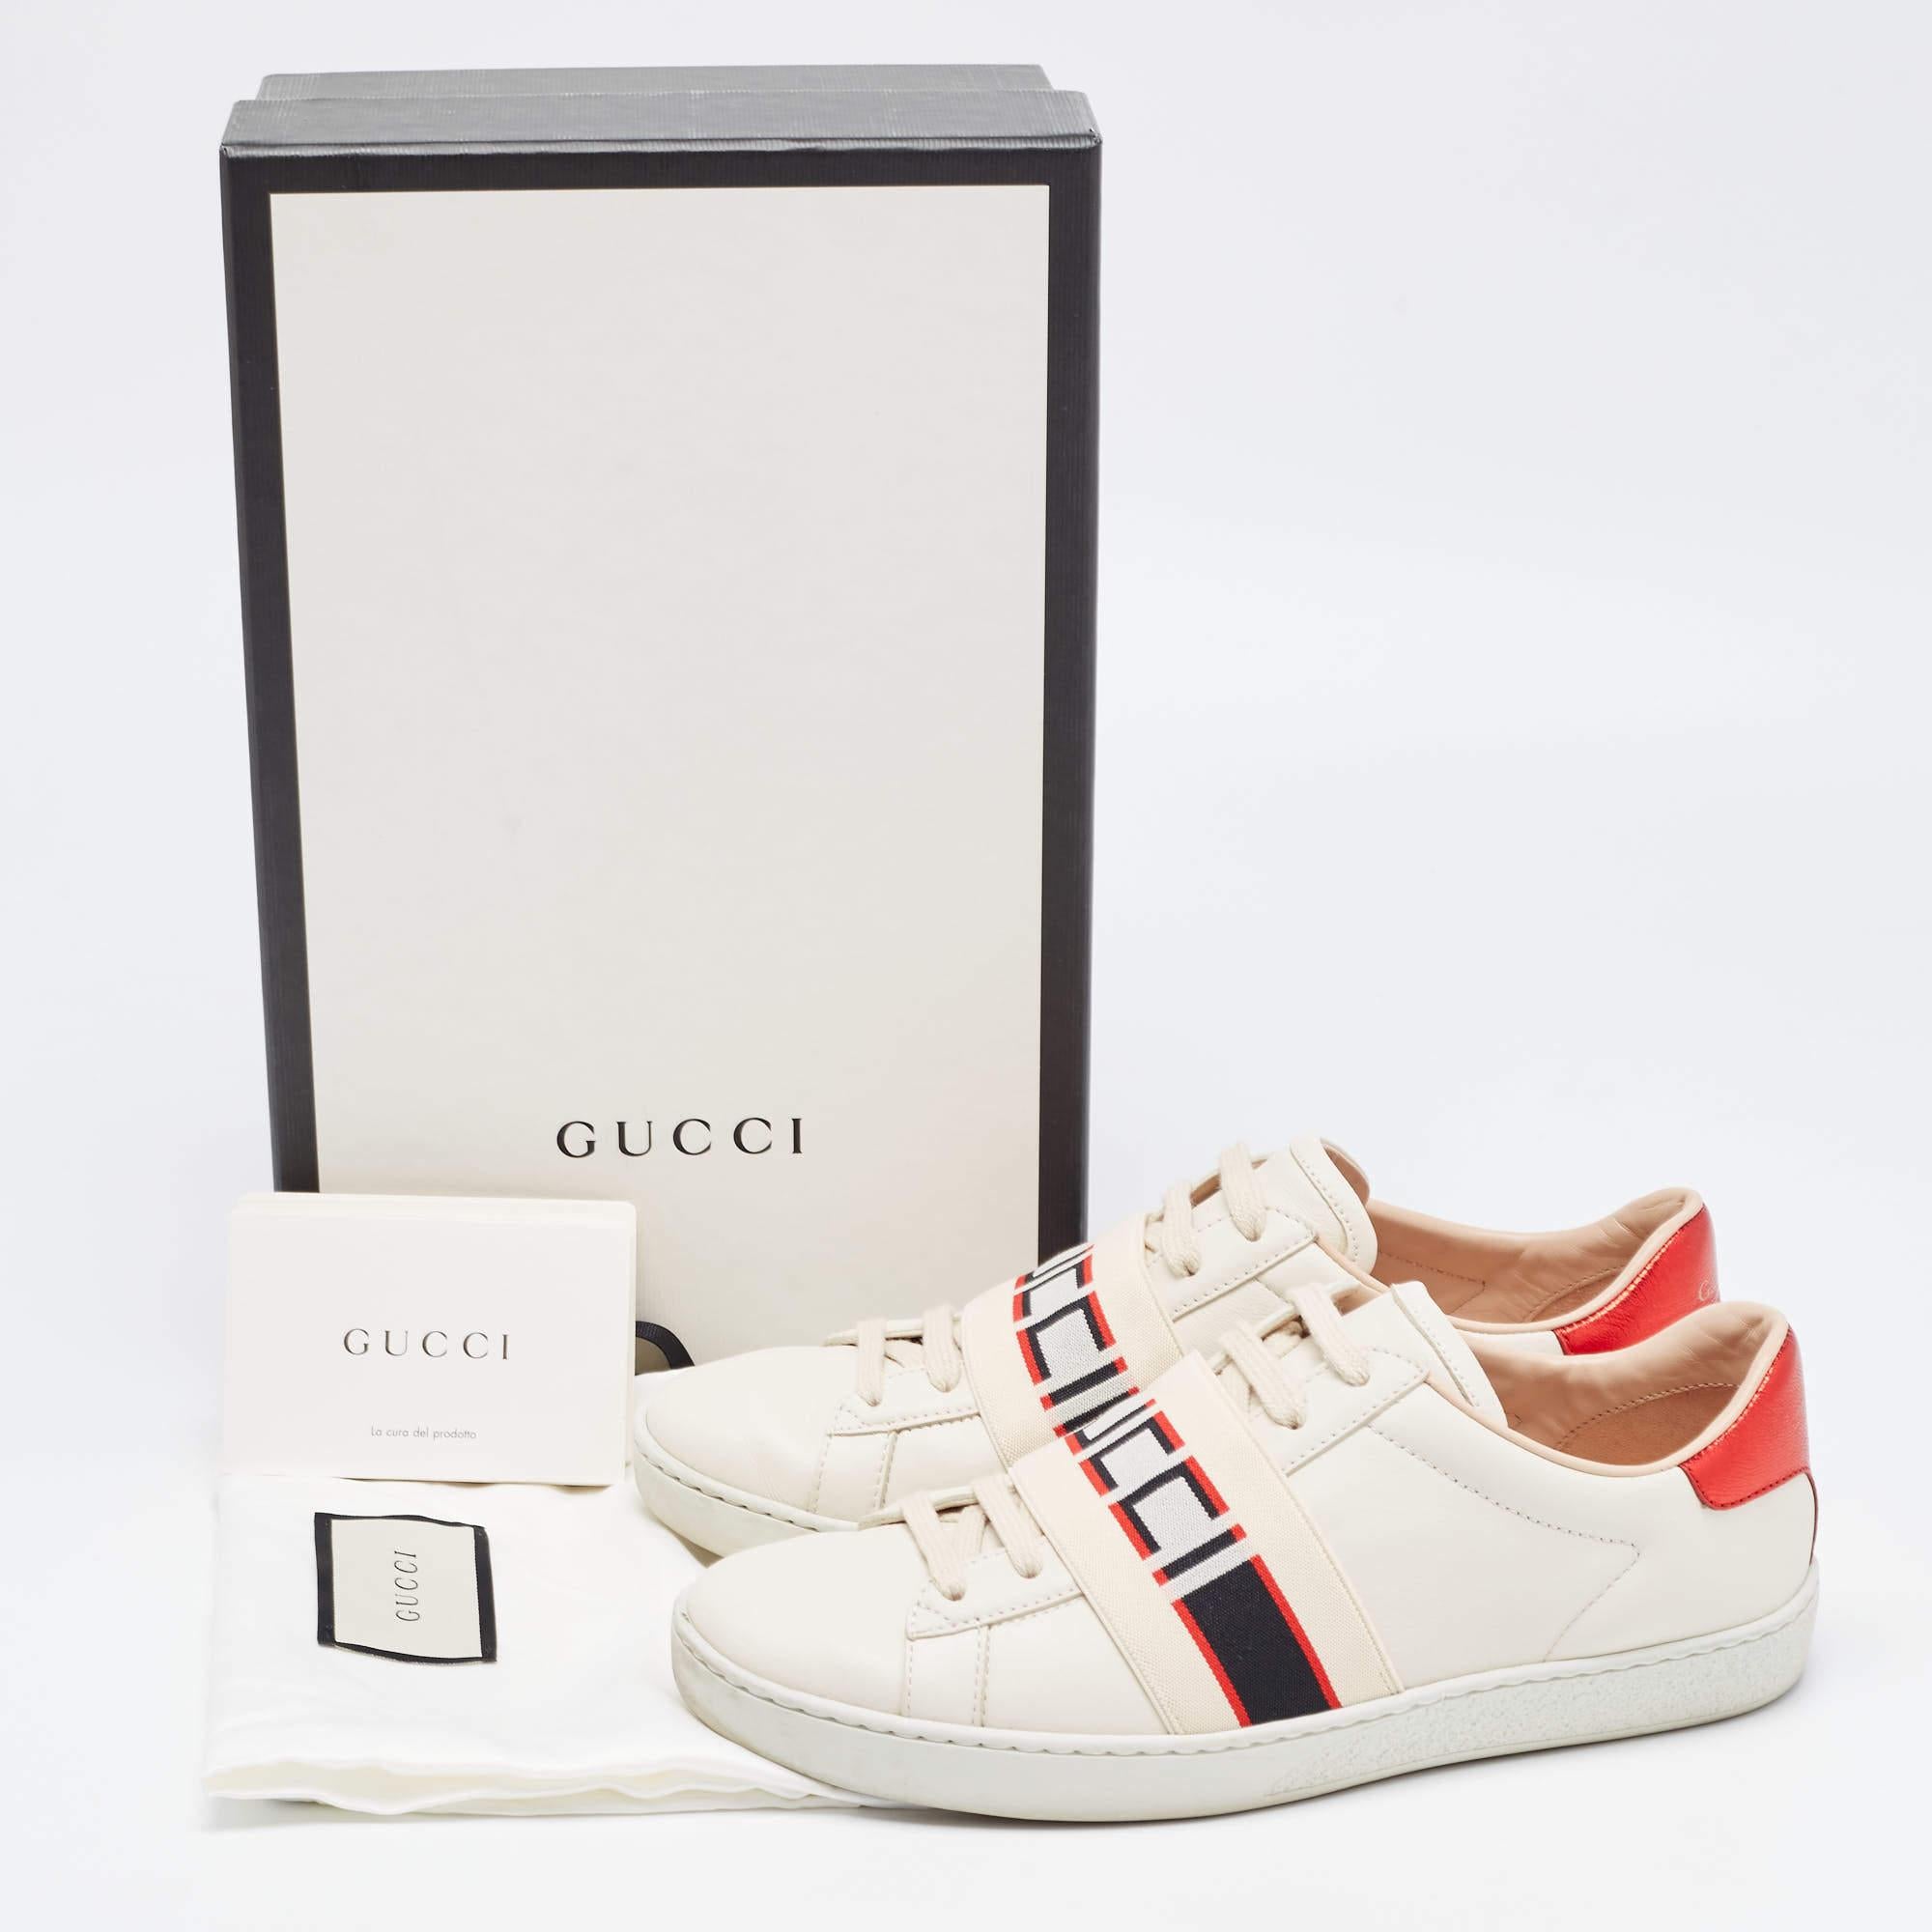 Gucci Cream/Red Leather Ace Gucci Band Low Top Sneakers Size 37 4